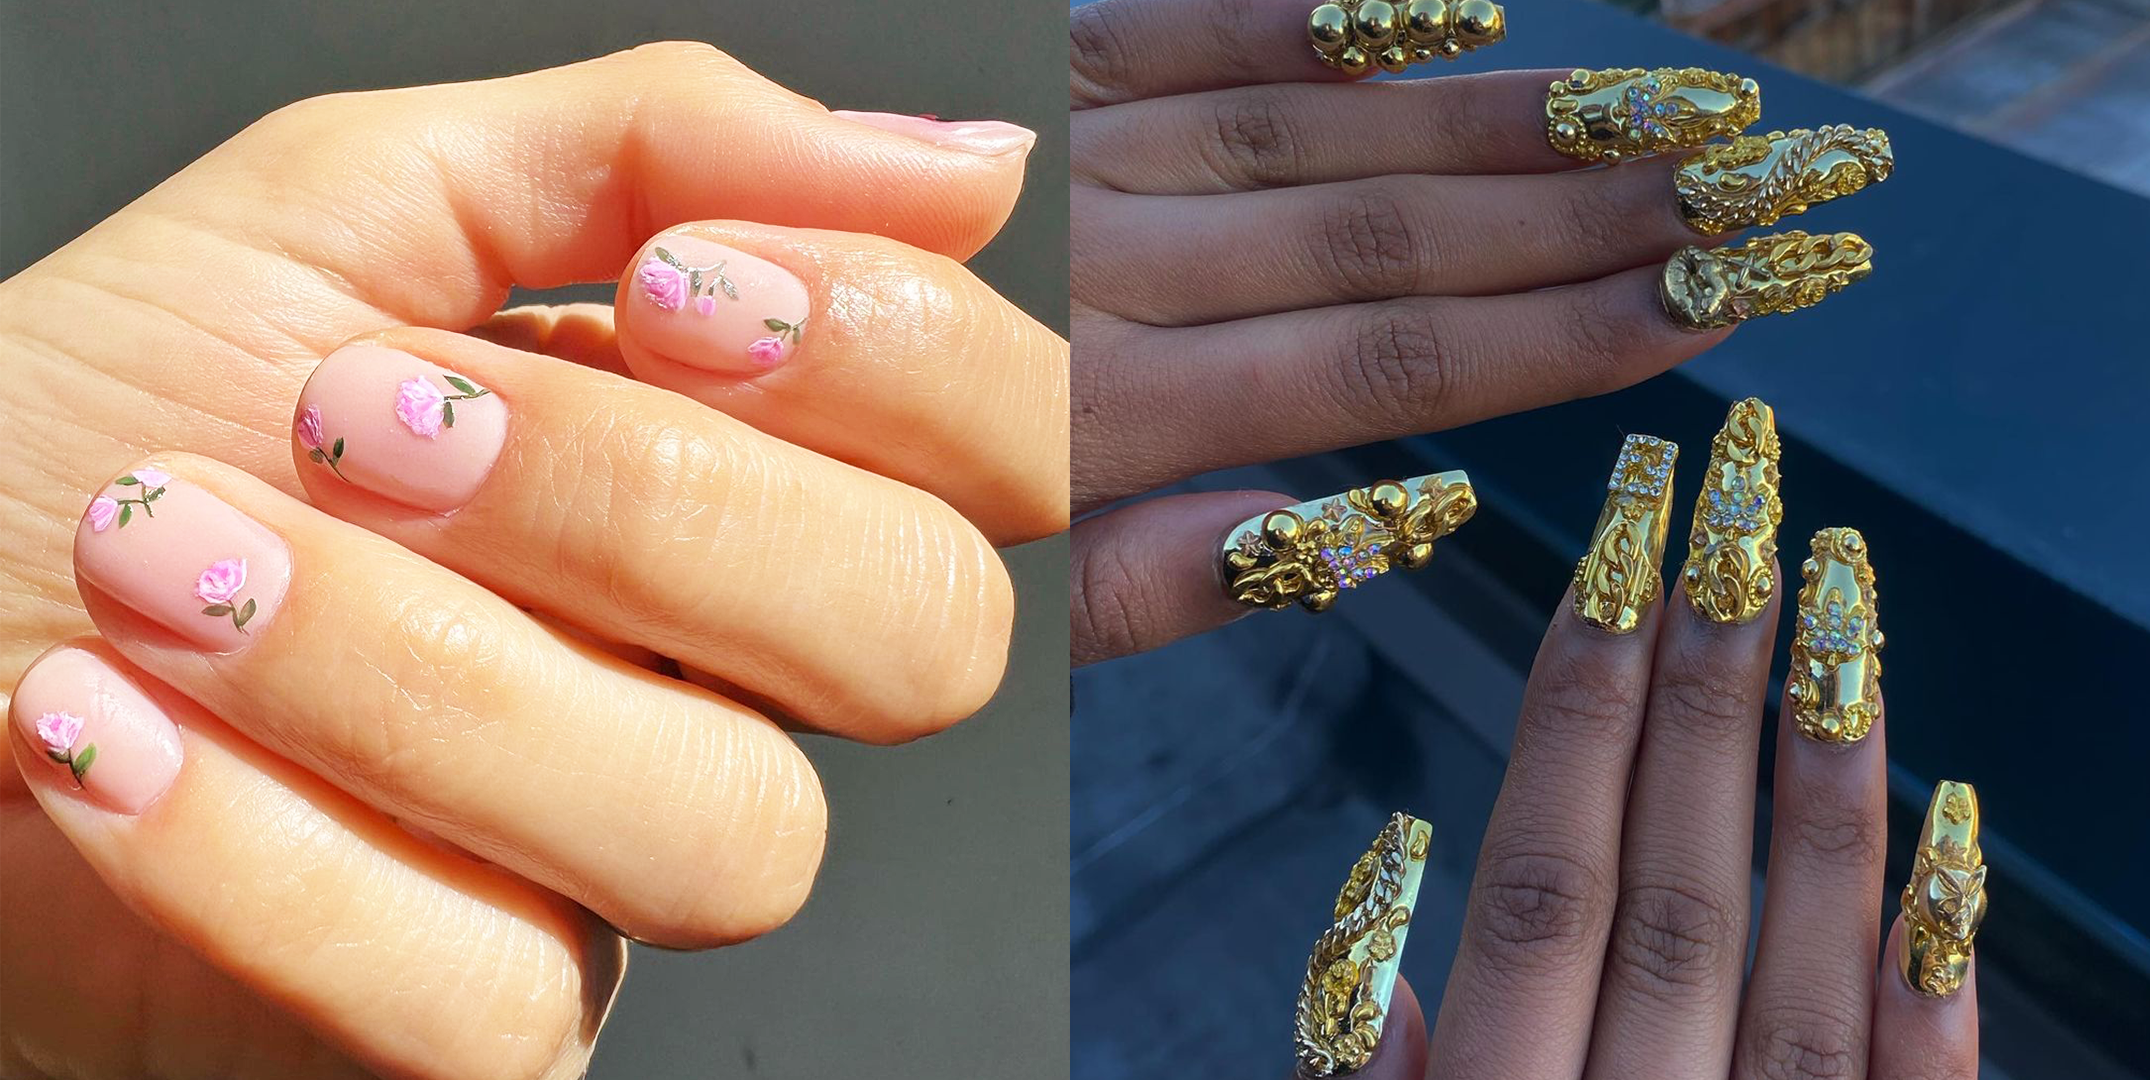 7 Best 2021 Nail Trends, Designs, And Manicure Ideas To Copy Asap